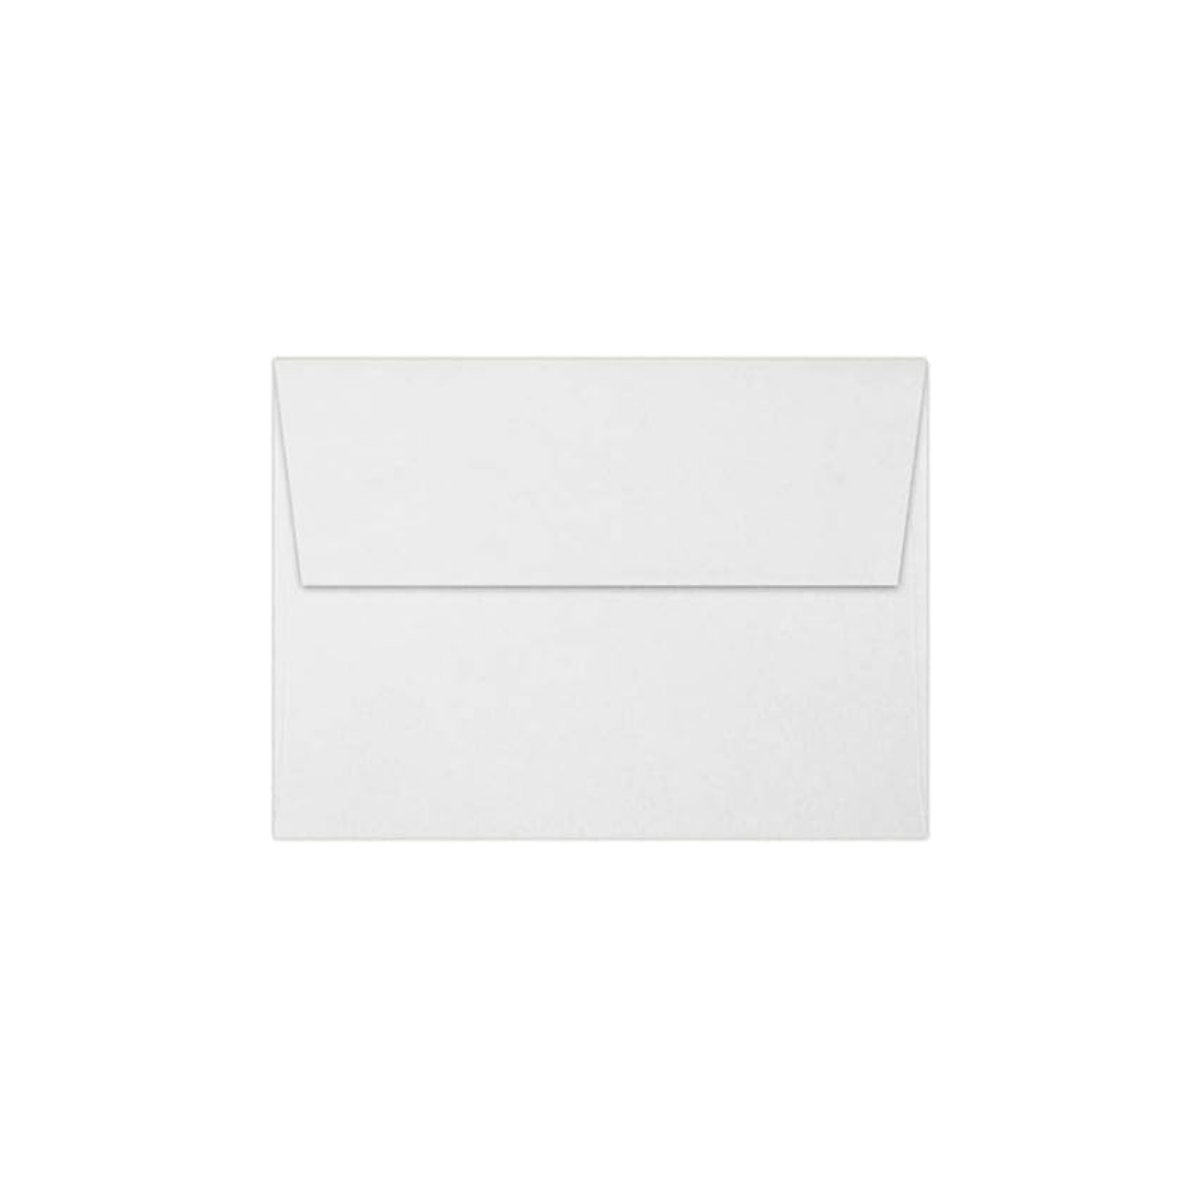 1000 Pack of A7 Envelopes - 70lb Premium Opaque Text for Professional, Secure, and Large Scale Mailing Needs - Perfect for Businesses, Invitations and Personal Use